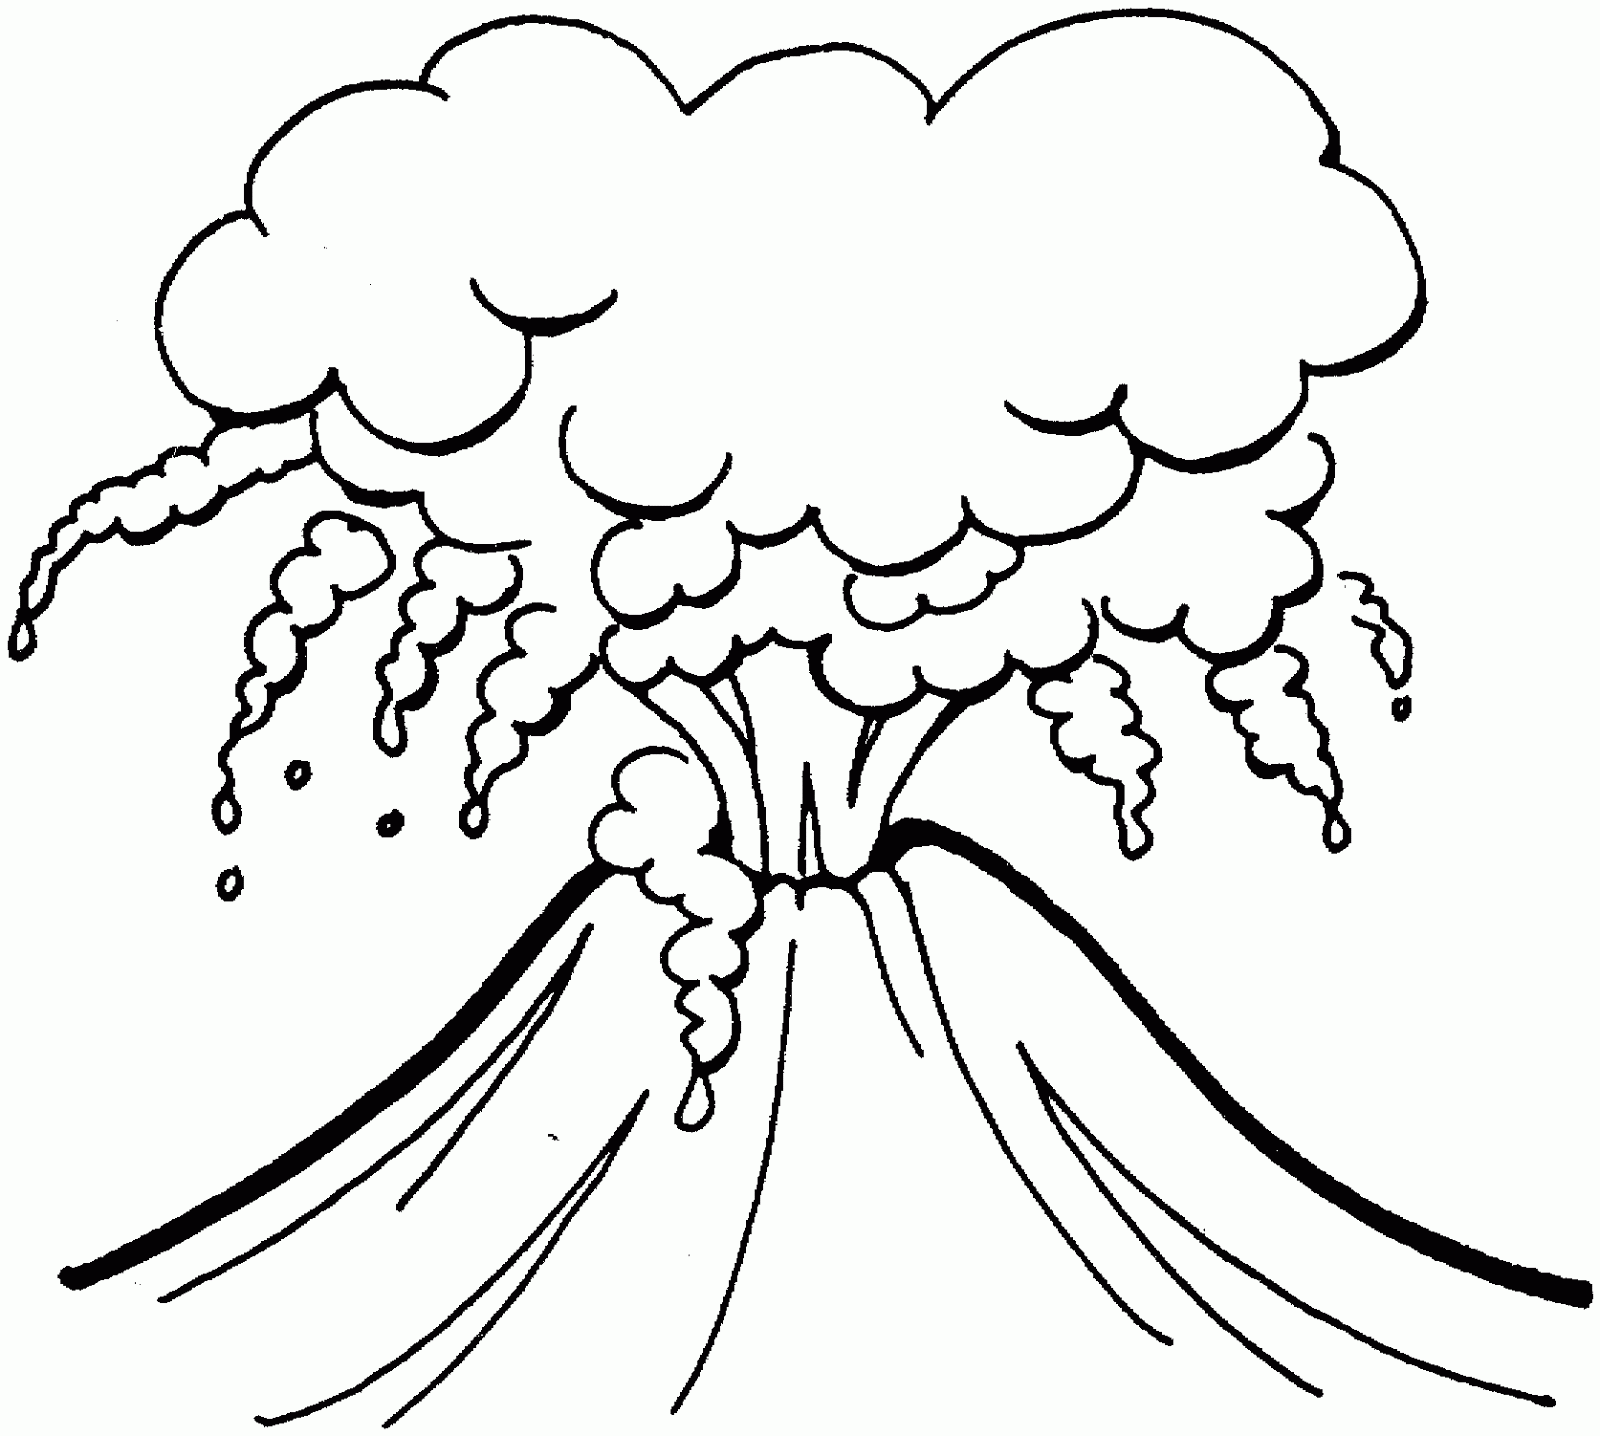 Pix For > Volcano Clipart Black And White